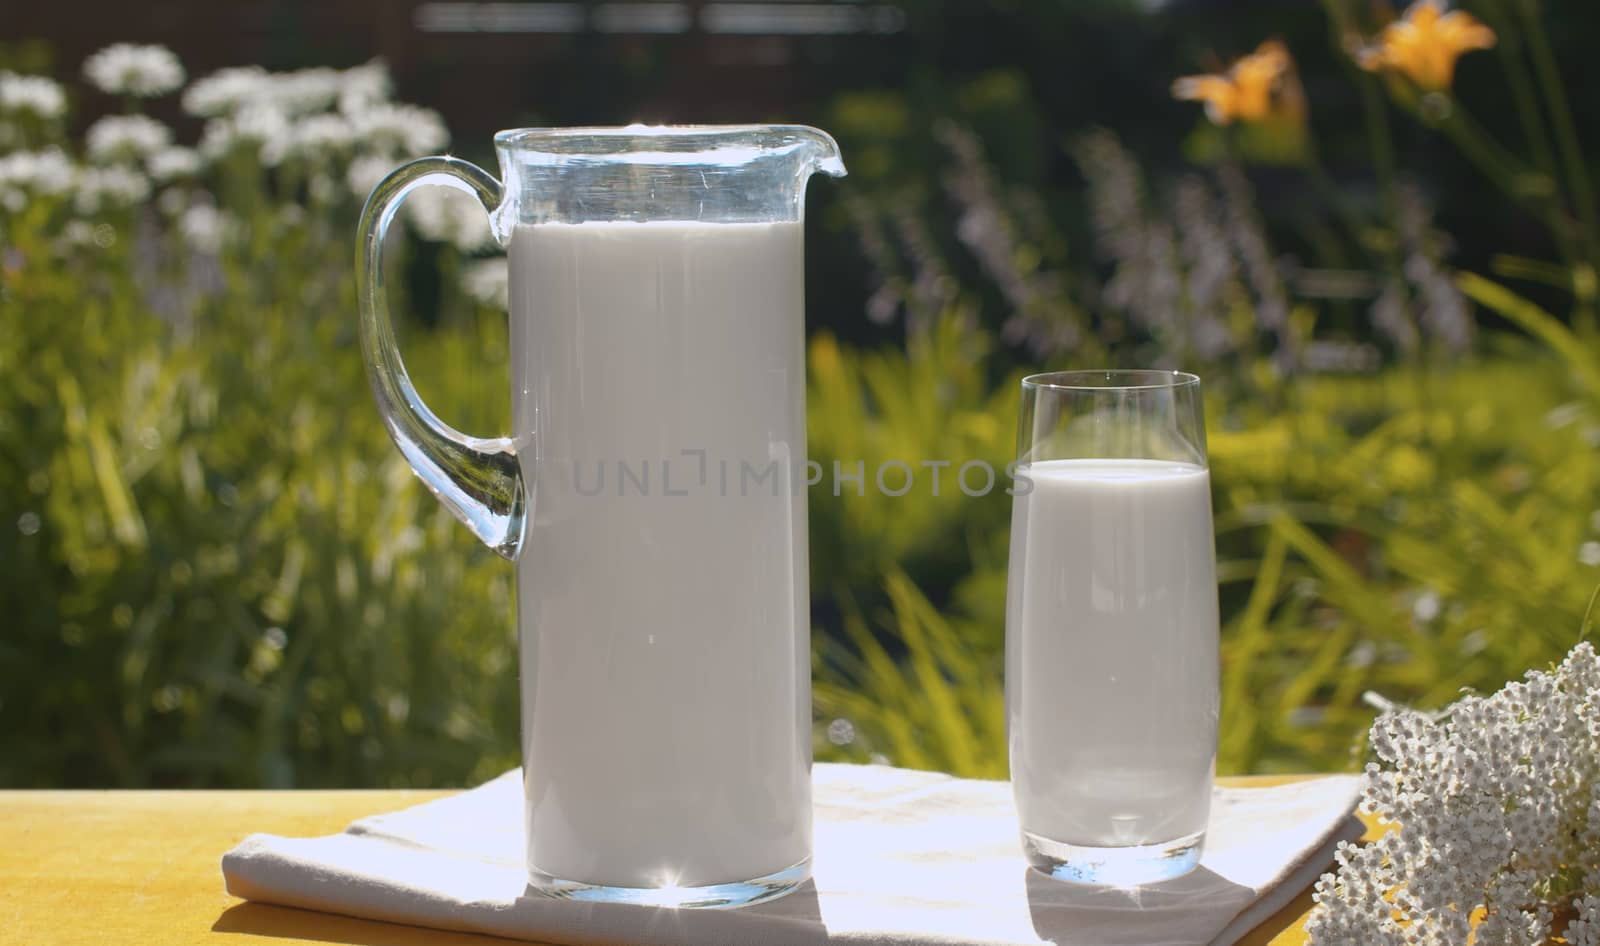 Close up shot of a jug and a glass of milk on a wooden table in the garden of a country house, on a background of flowers